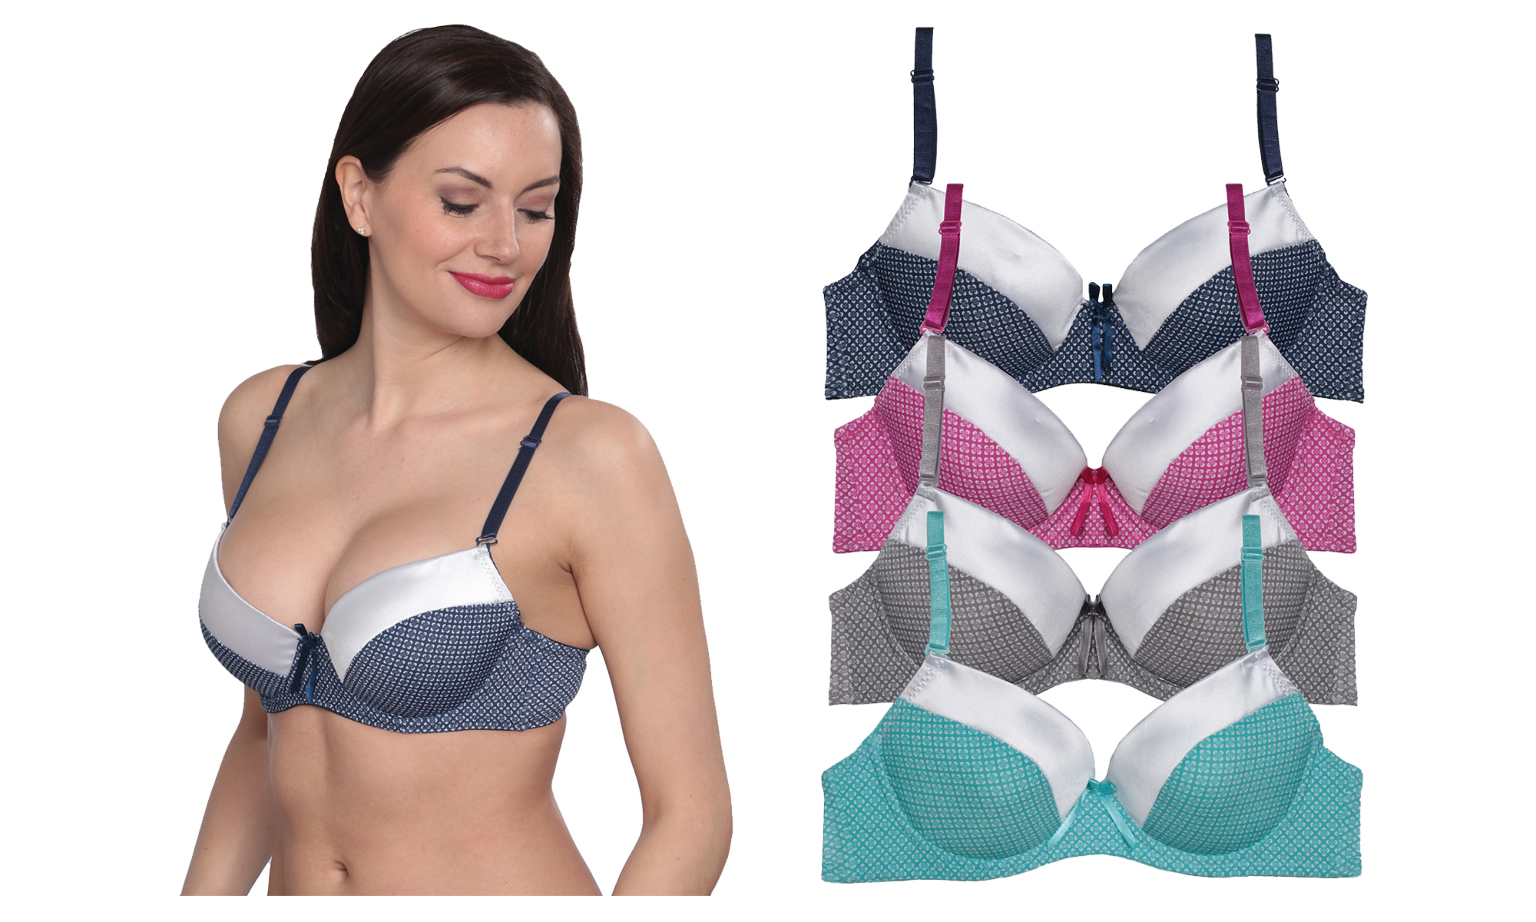 Wholesale bras size 44d For Supportive Underwear 